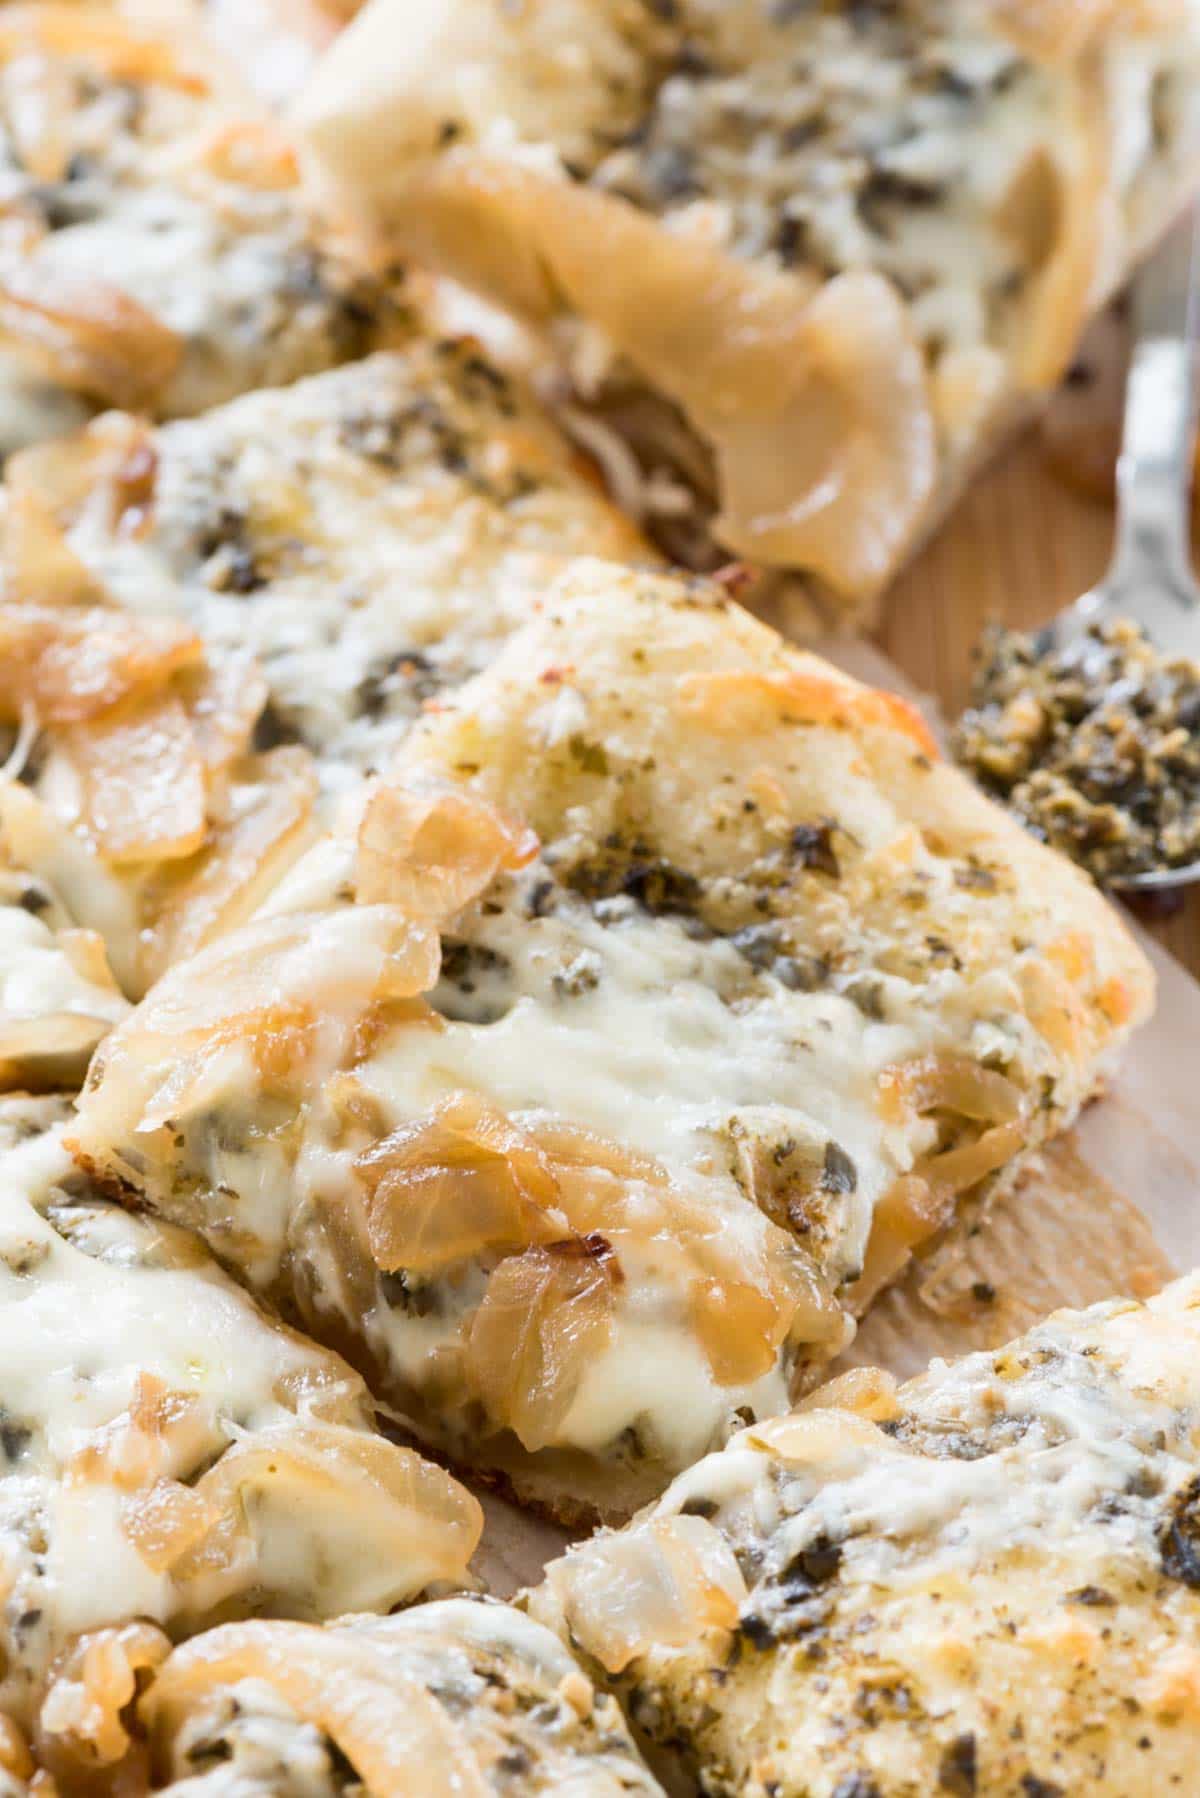 Caramelized Onion Pesto Flatbread - this EASY 4 ingredient pizza recipe is the perfect appetizer. Pesto, caramelized onions, and mozzarella baked onto a pizza crust - every time I make this people rave about it!